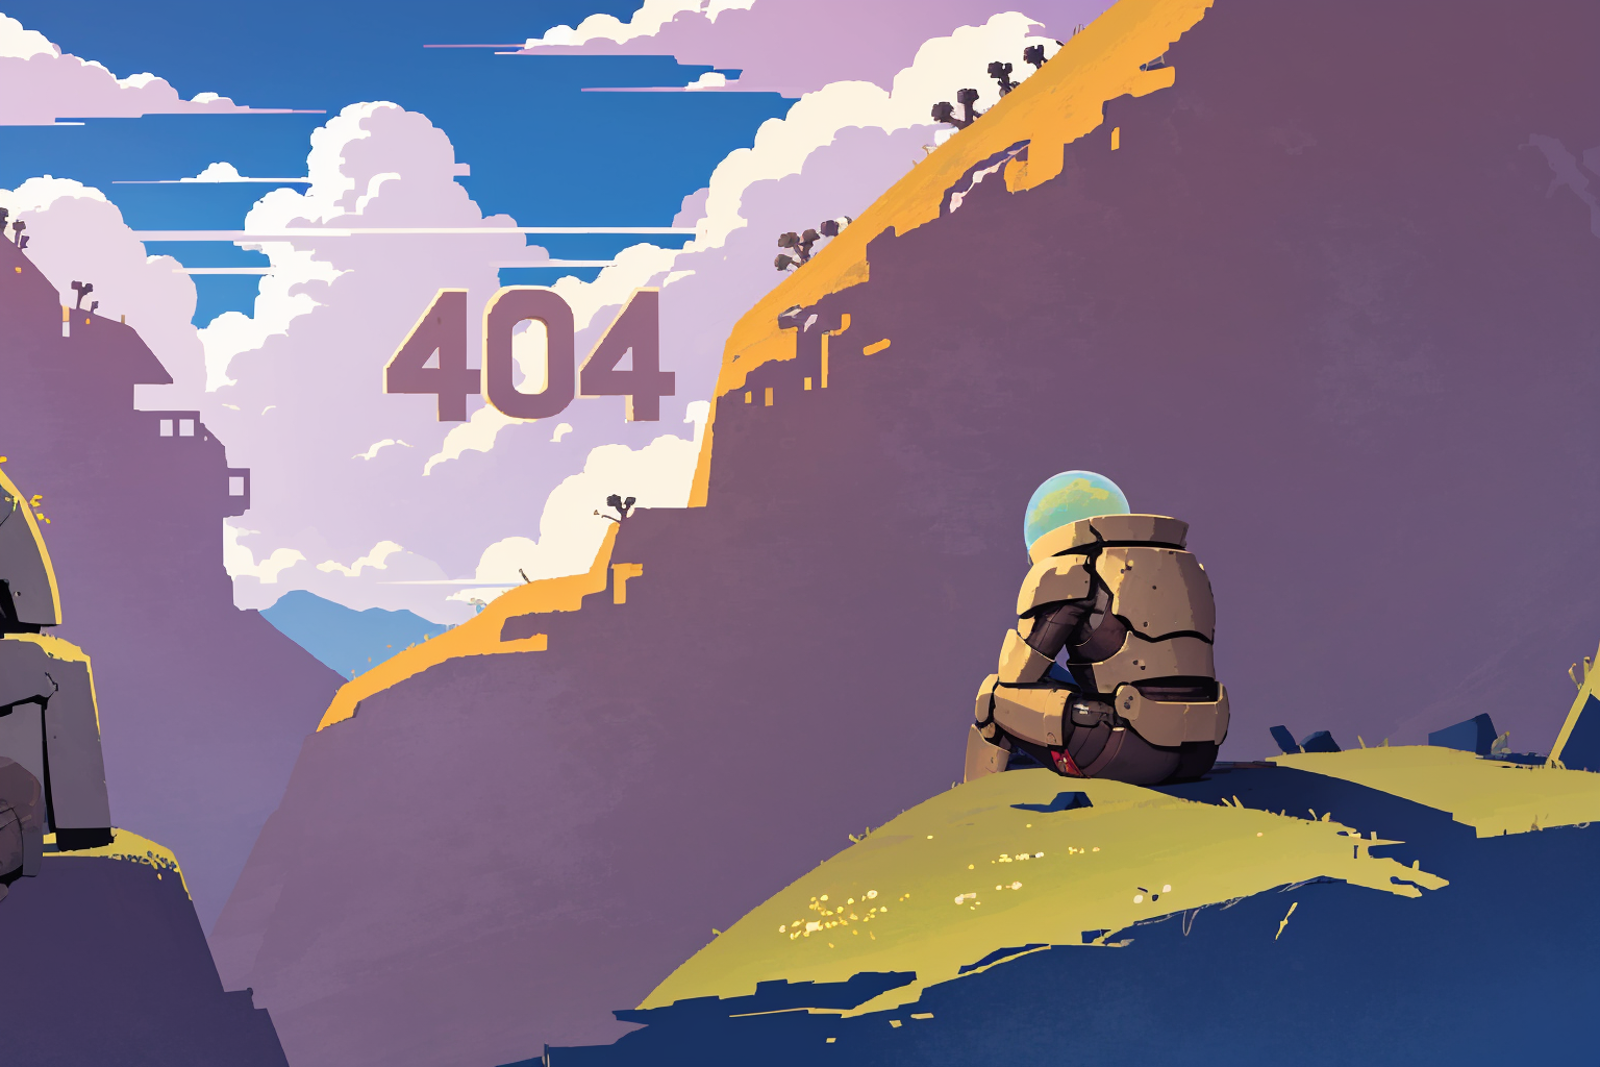 A robot with a backpack on a mountain top, with the words "404" in the background.